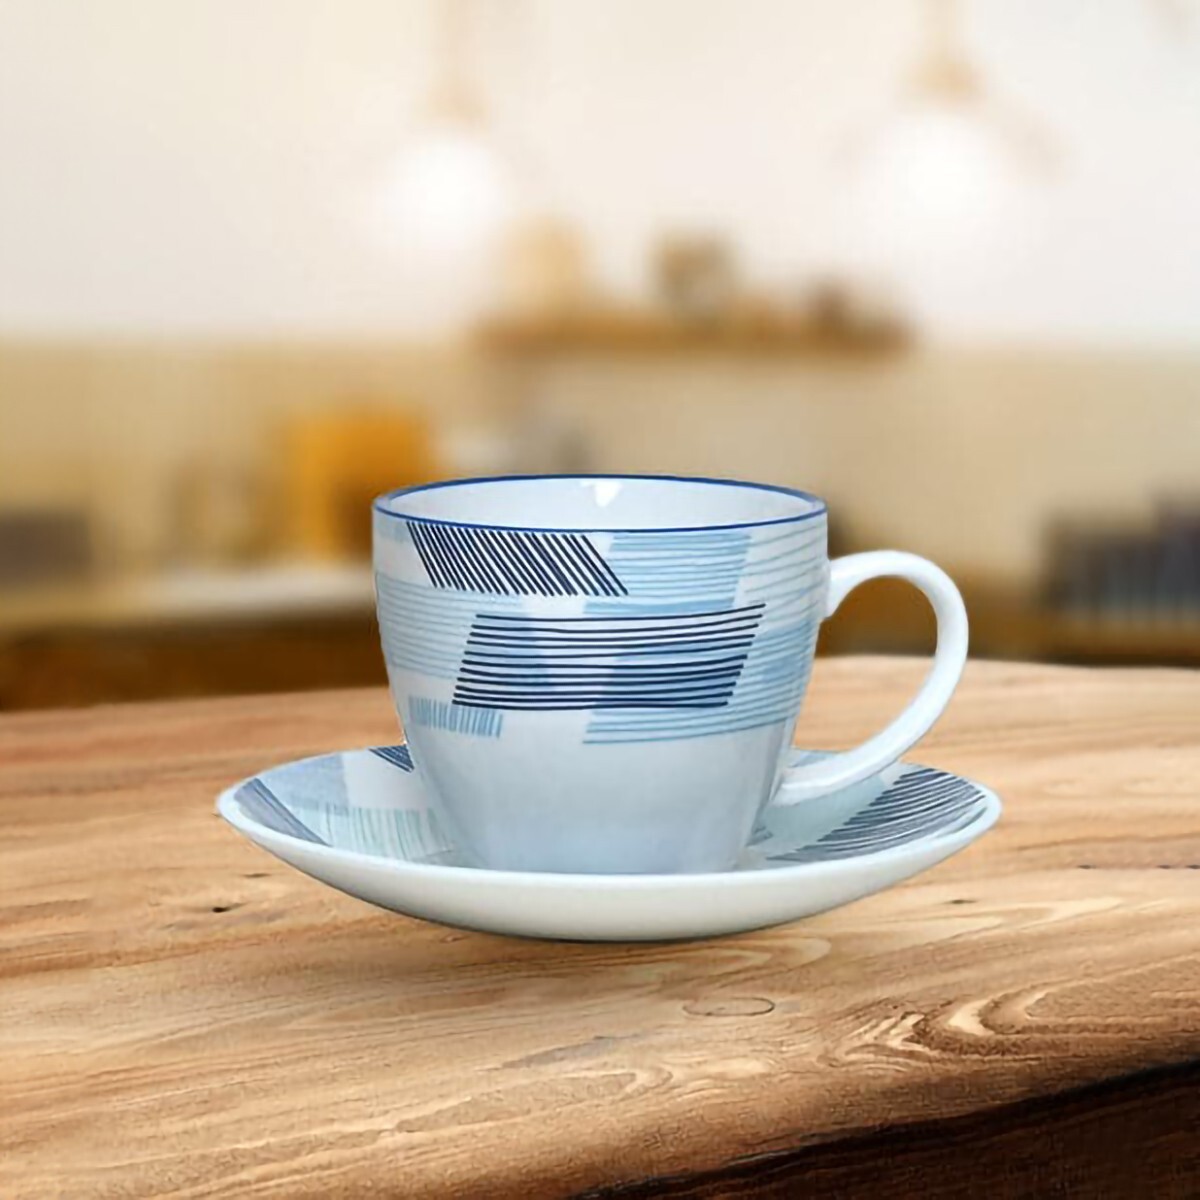 Home Cup & Saucer 200ml SF07-8